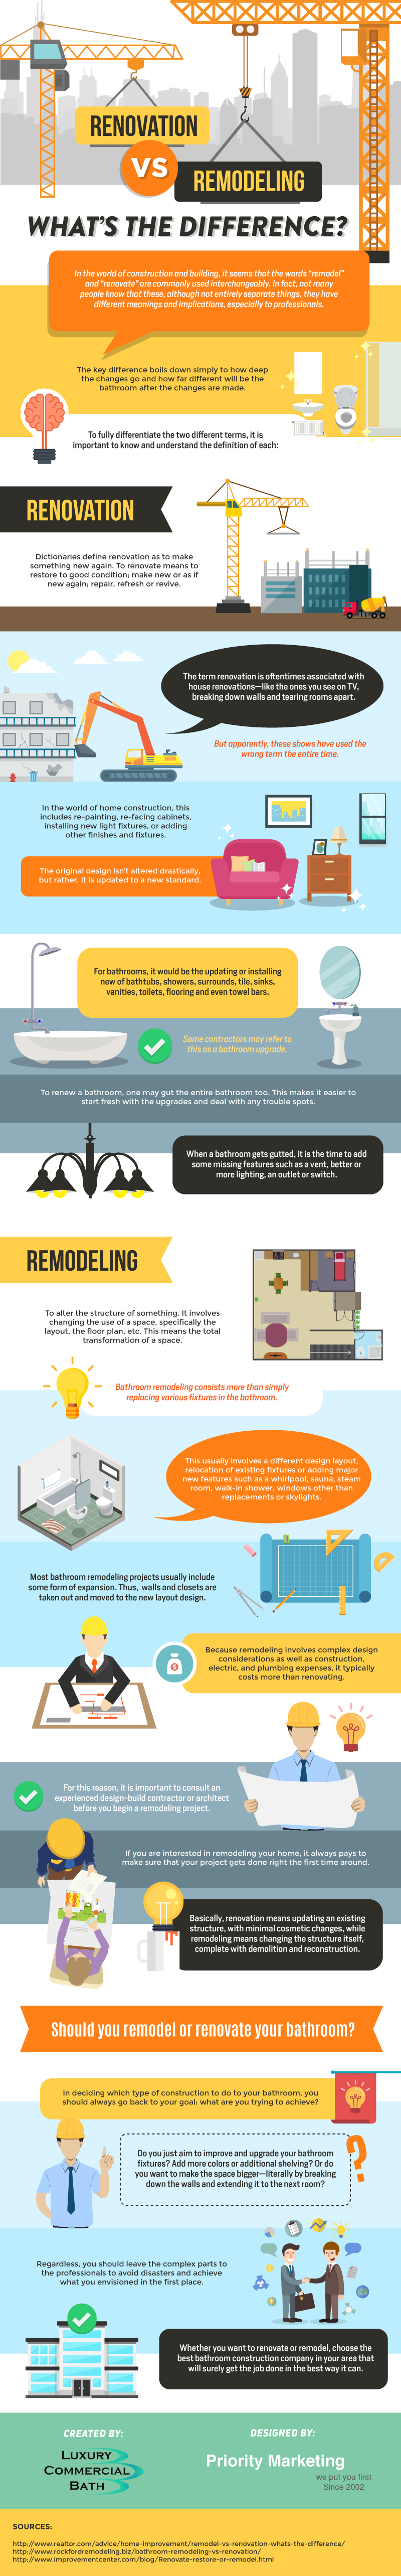 Renovation vs. Remodeling: What’s the difference?